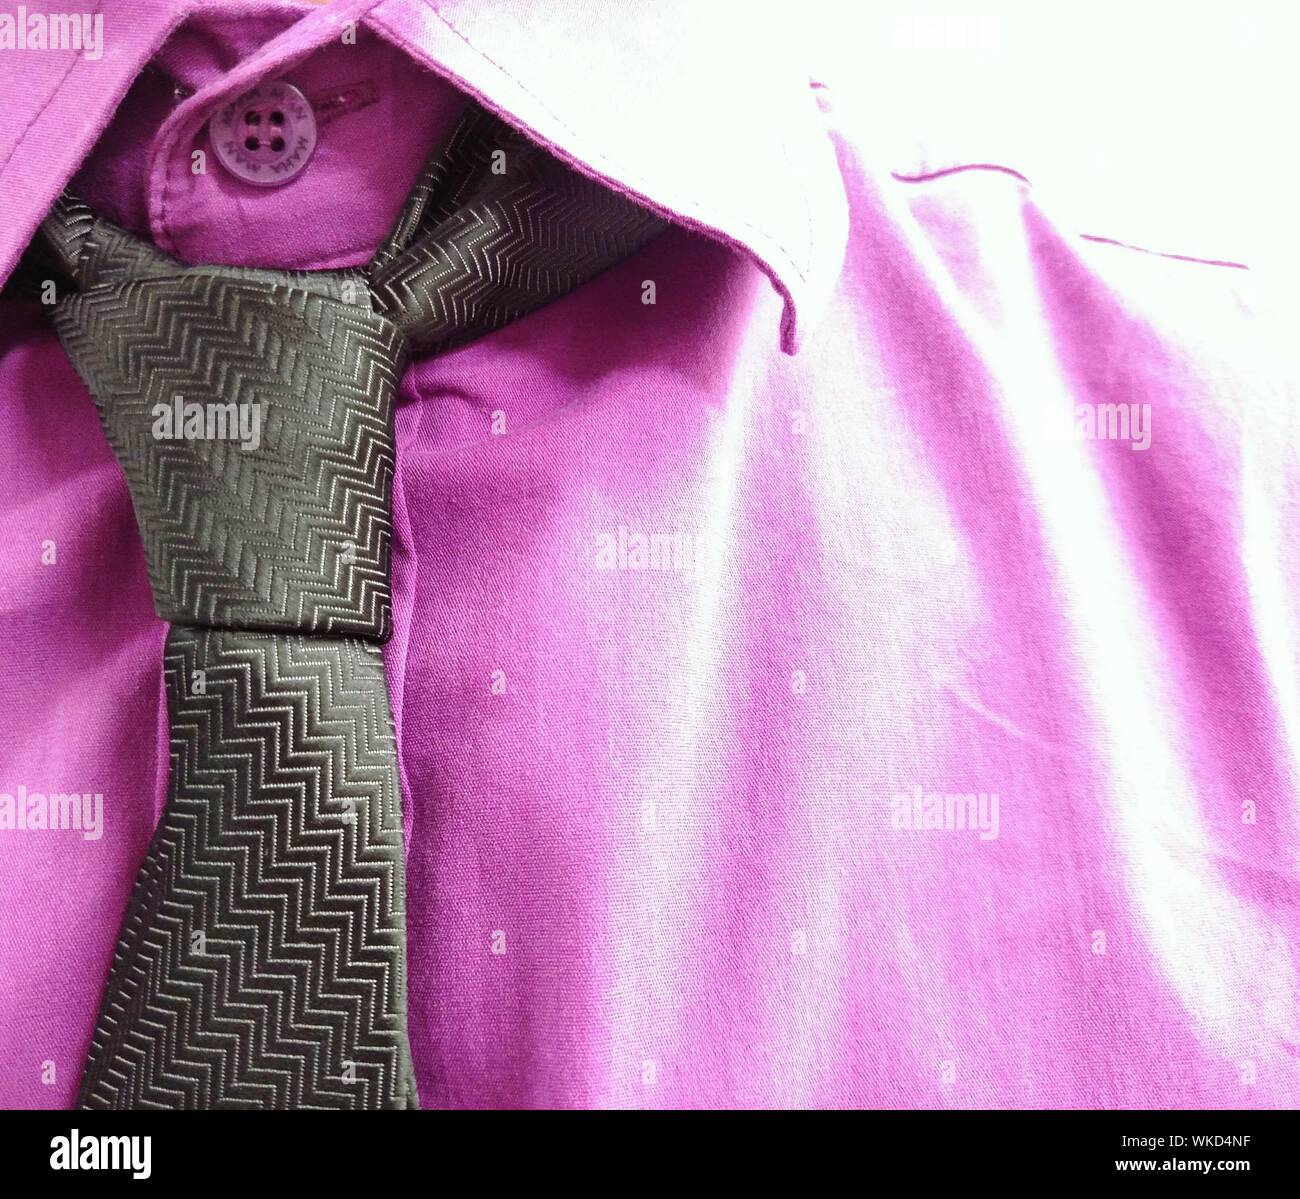 Midsection Of Businessman With Purple Shirt And Tie Stock Photo